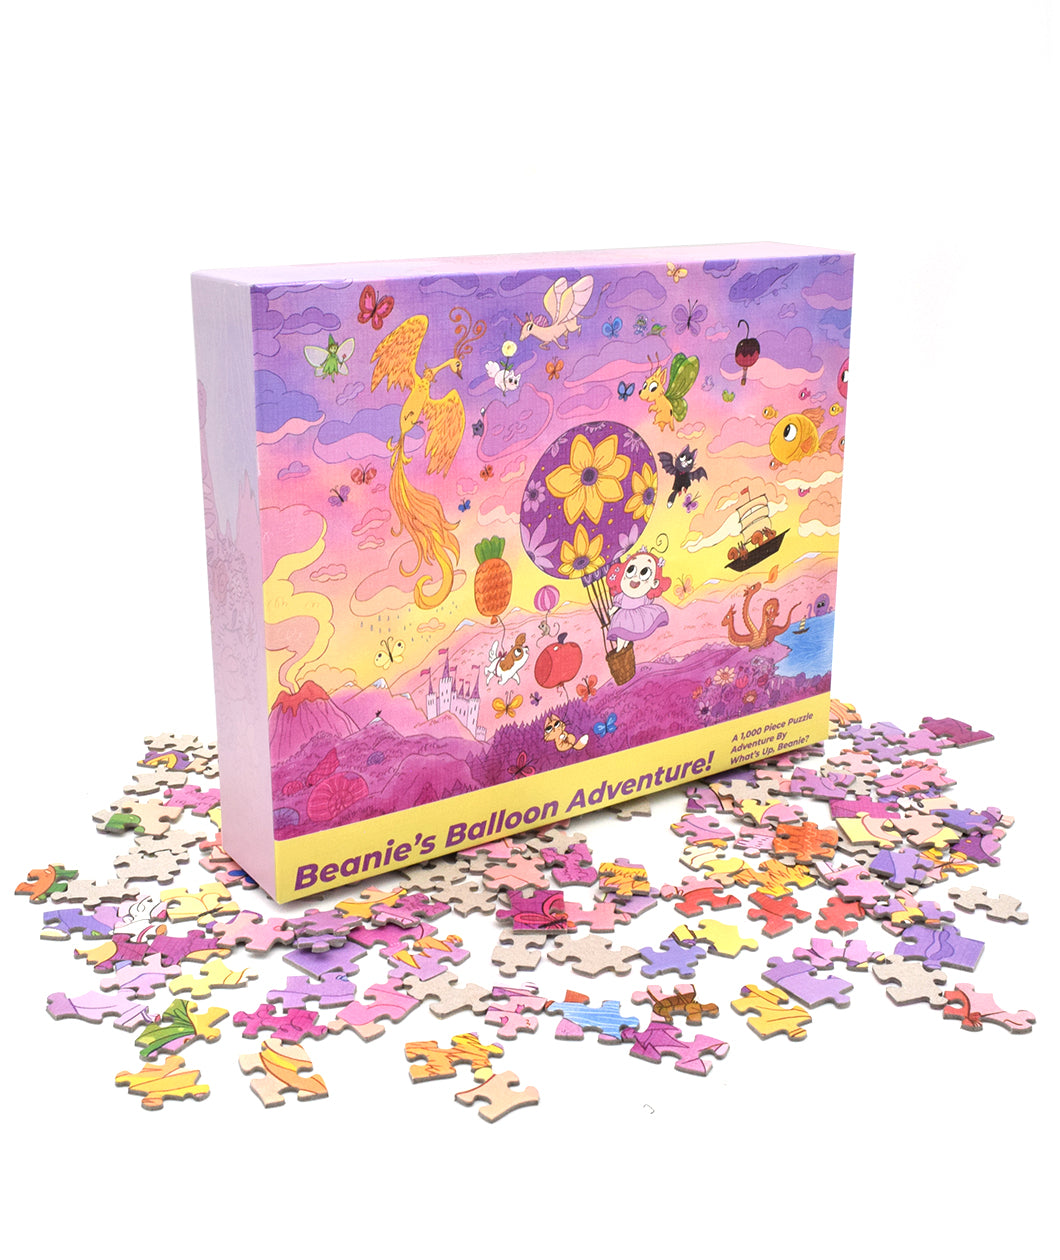 A rectangular puzzle box atop a pile of colorful puzzle pieces. The puzzle box has a pink and yellow sunset scheme and features a girl with pink hair in the basket of a purple hot air balloon decorated with flowers. The balloon floats amid a menagerie of whimsical objects in a sunset sky. Along the bottom of the box is the text "Beanie's Balloon Adventure!"